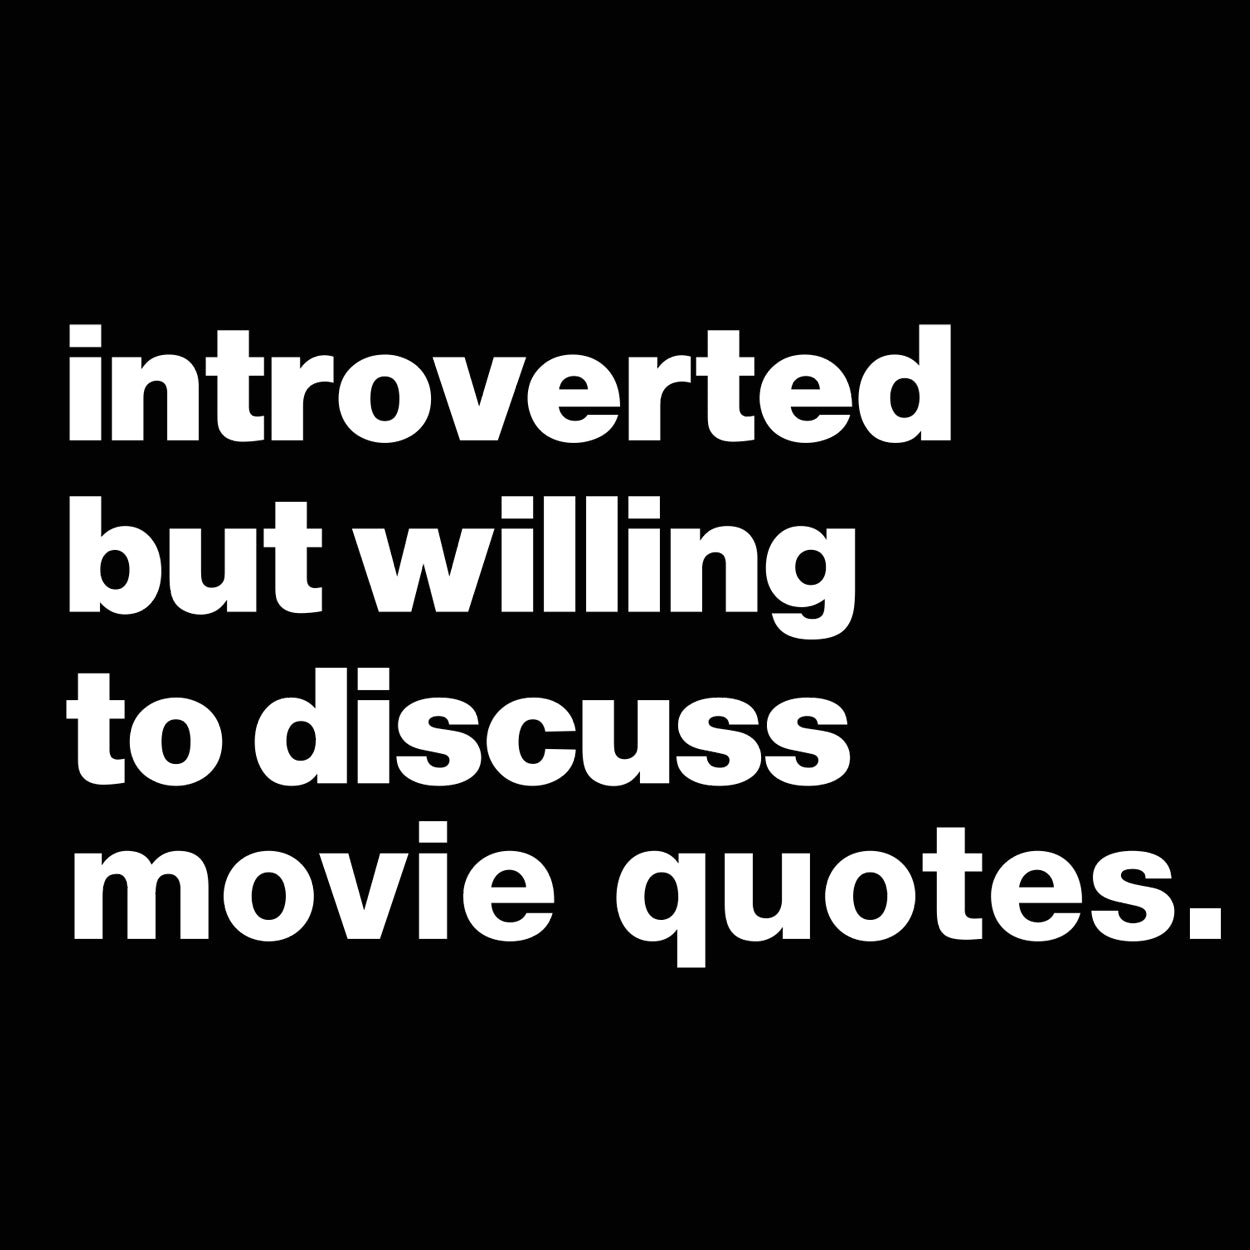 Introverted But Willing To Discuss Movie Quotes Tshirt - Donkey Tees